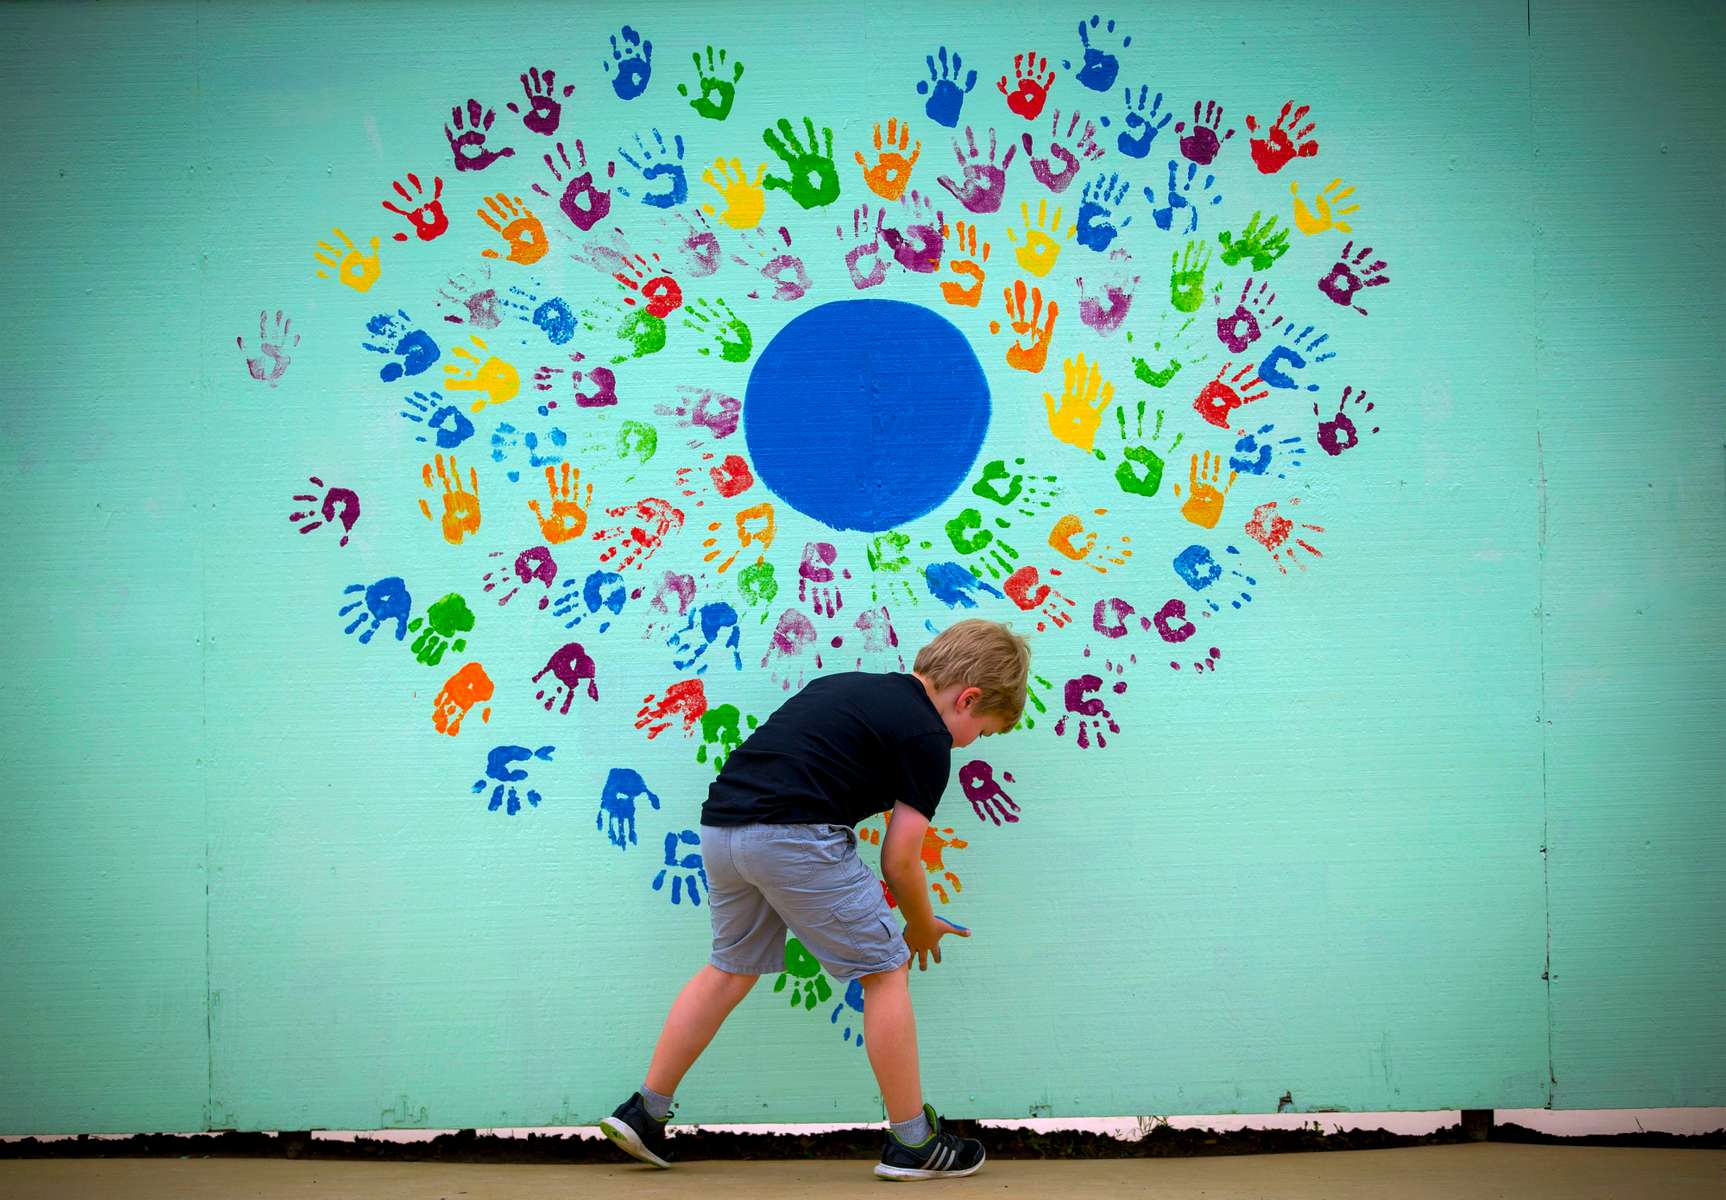 Second grader Harper Stiles puts his handprint on a mural with fellow students' prints during Earth Day activities at Adams Elementary School in Eugene, Ore.